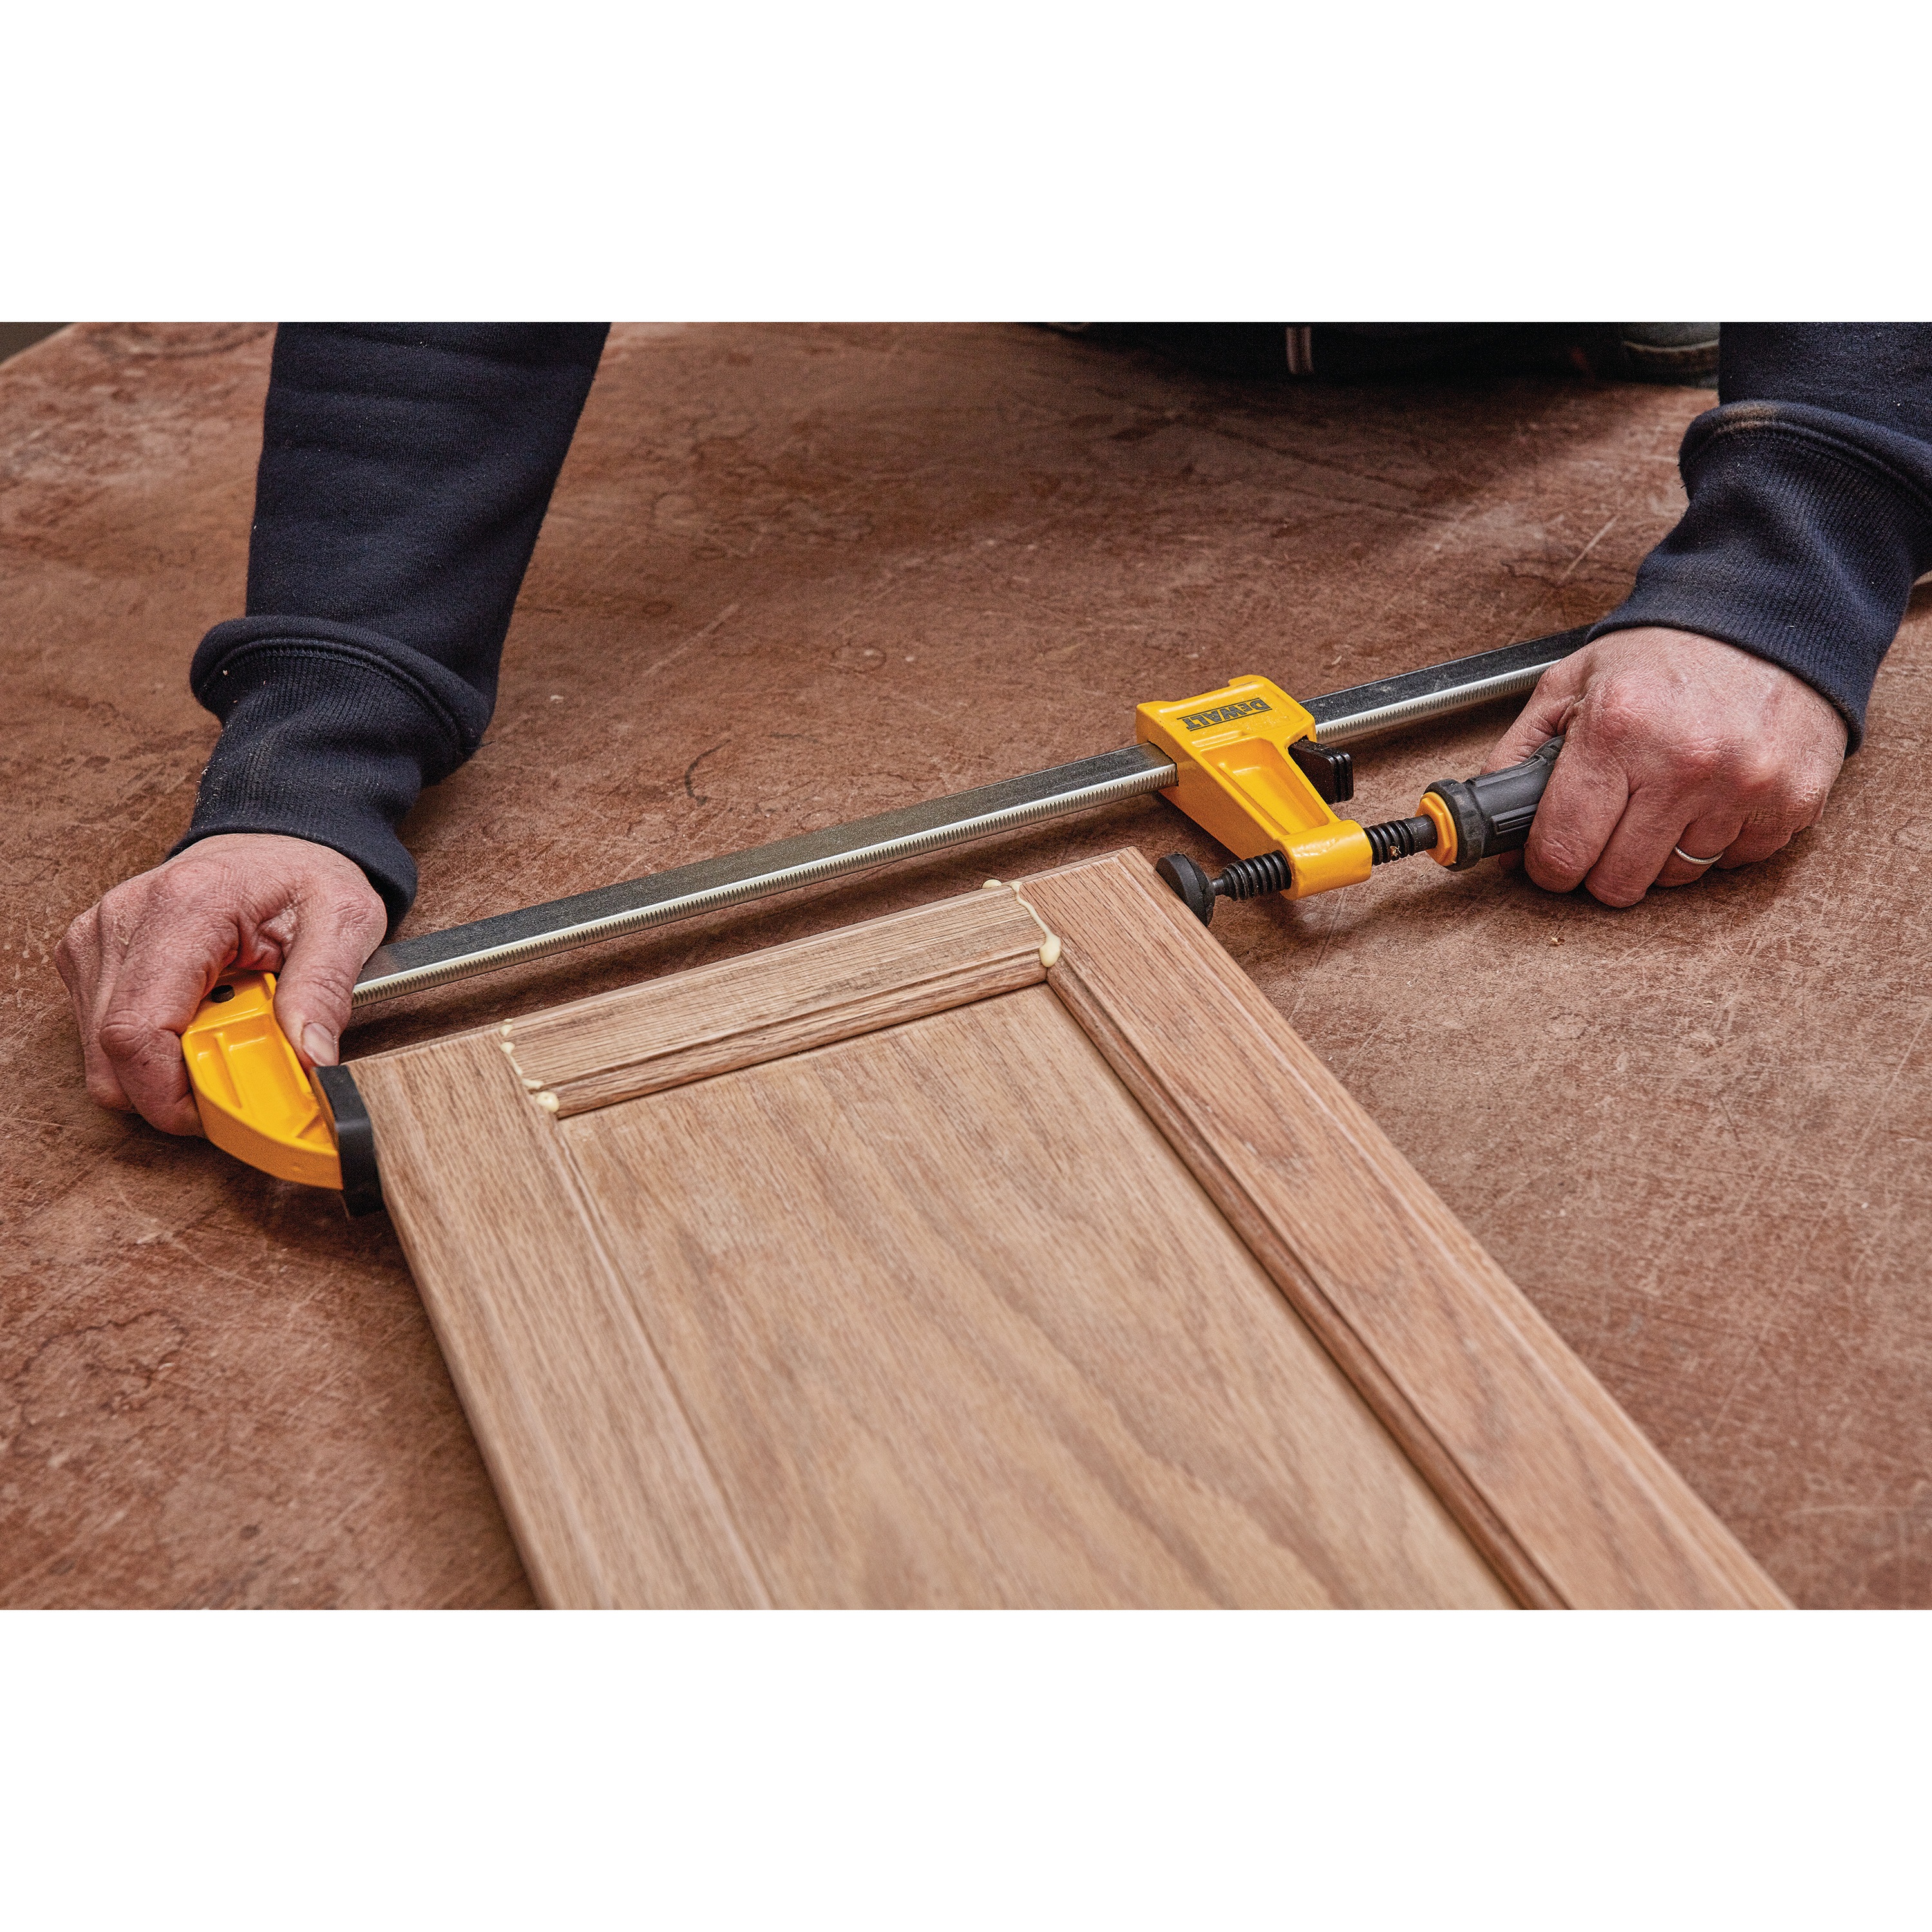 6 inch Heavy Duty Bar Clamp being used on wooden structures by a person.